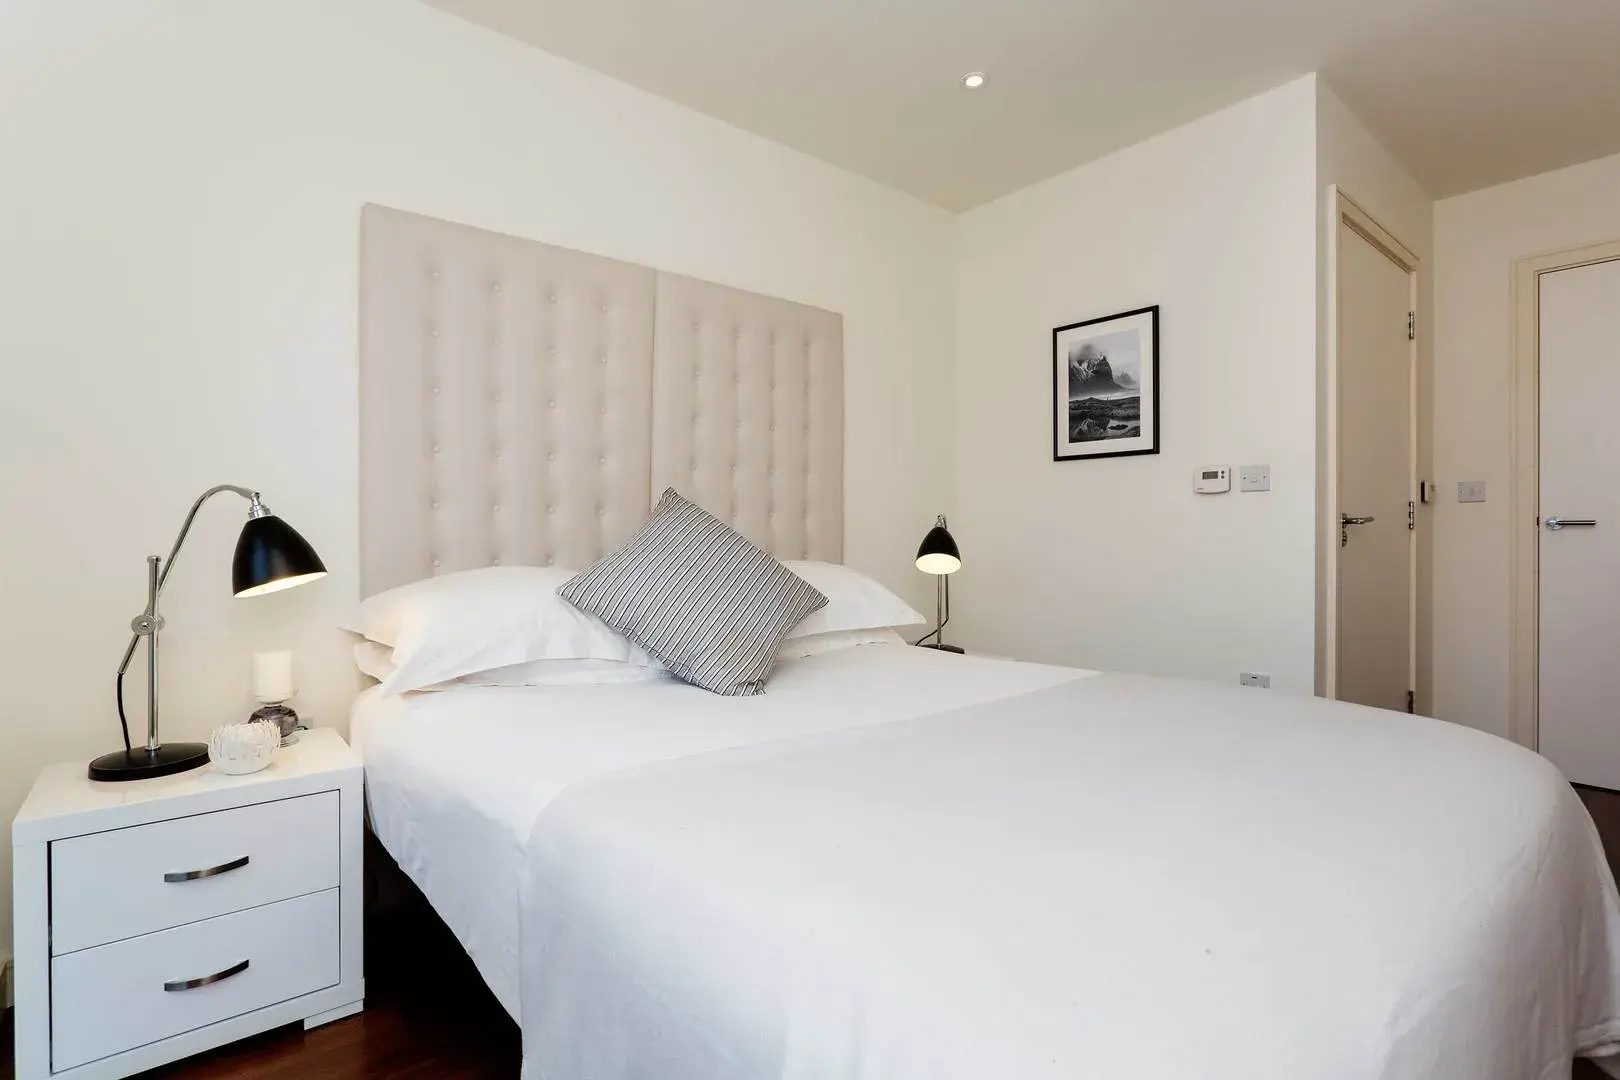 Enterprise Way, holiday home in Wandsworth, London